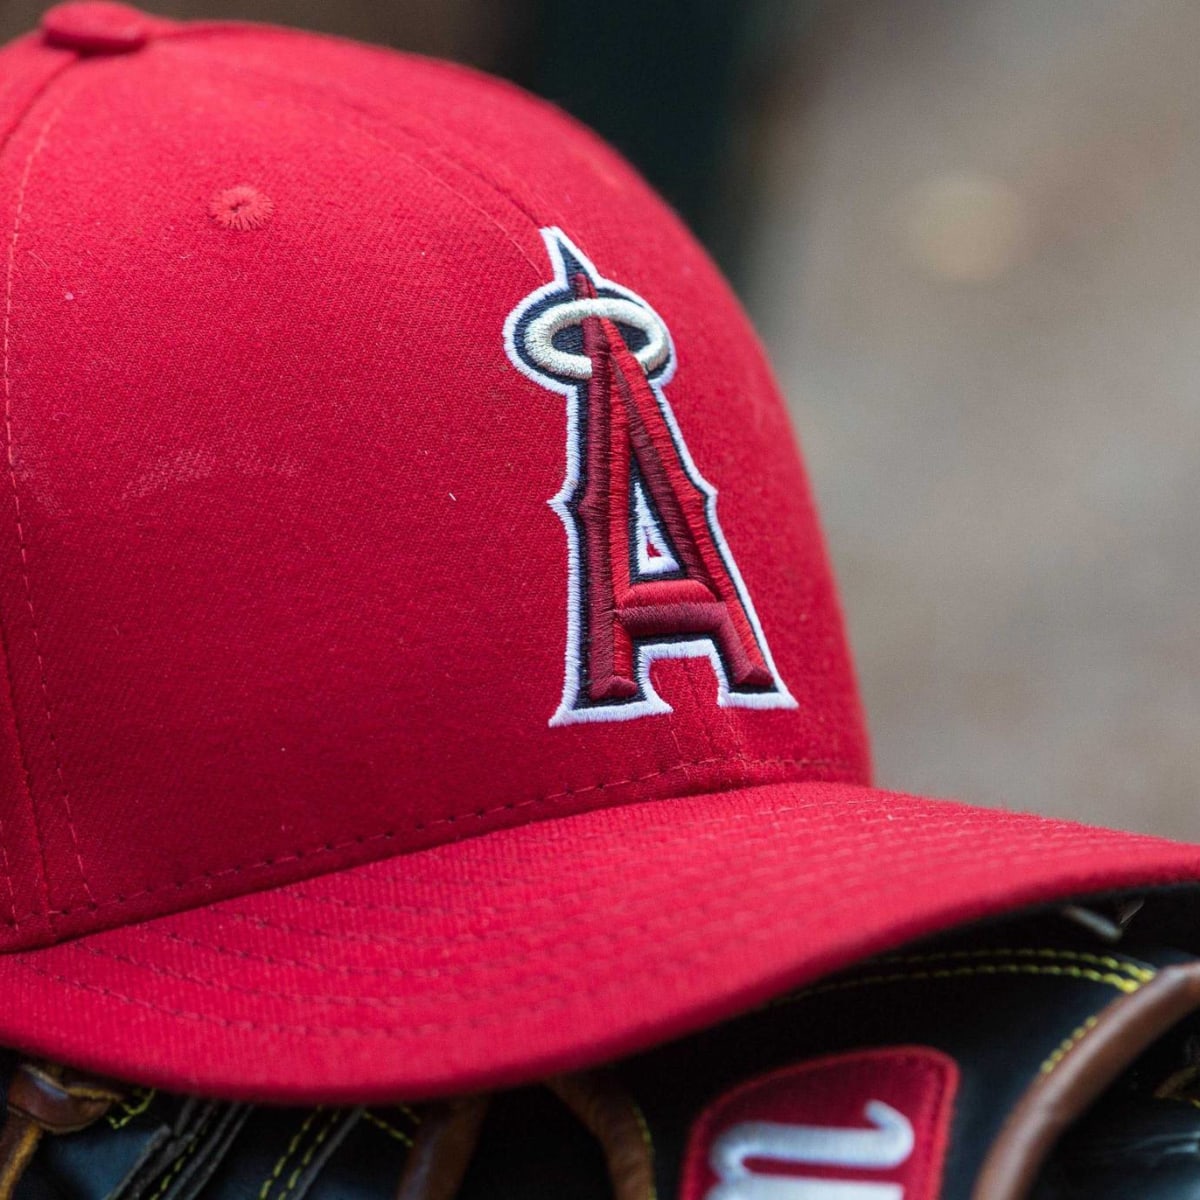 Eric Kay sentenced to 22 years in Angels pitcher Tyler Skaggs